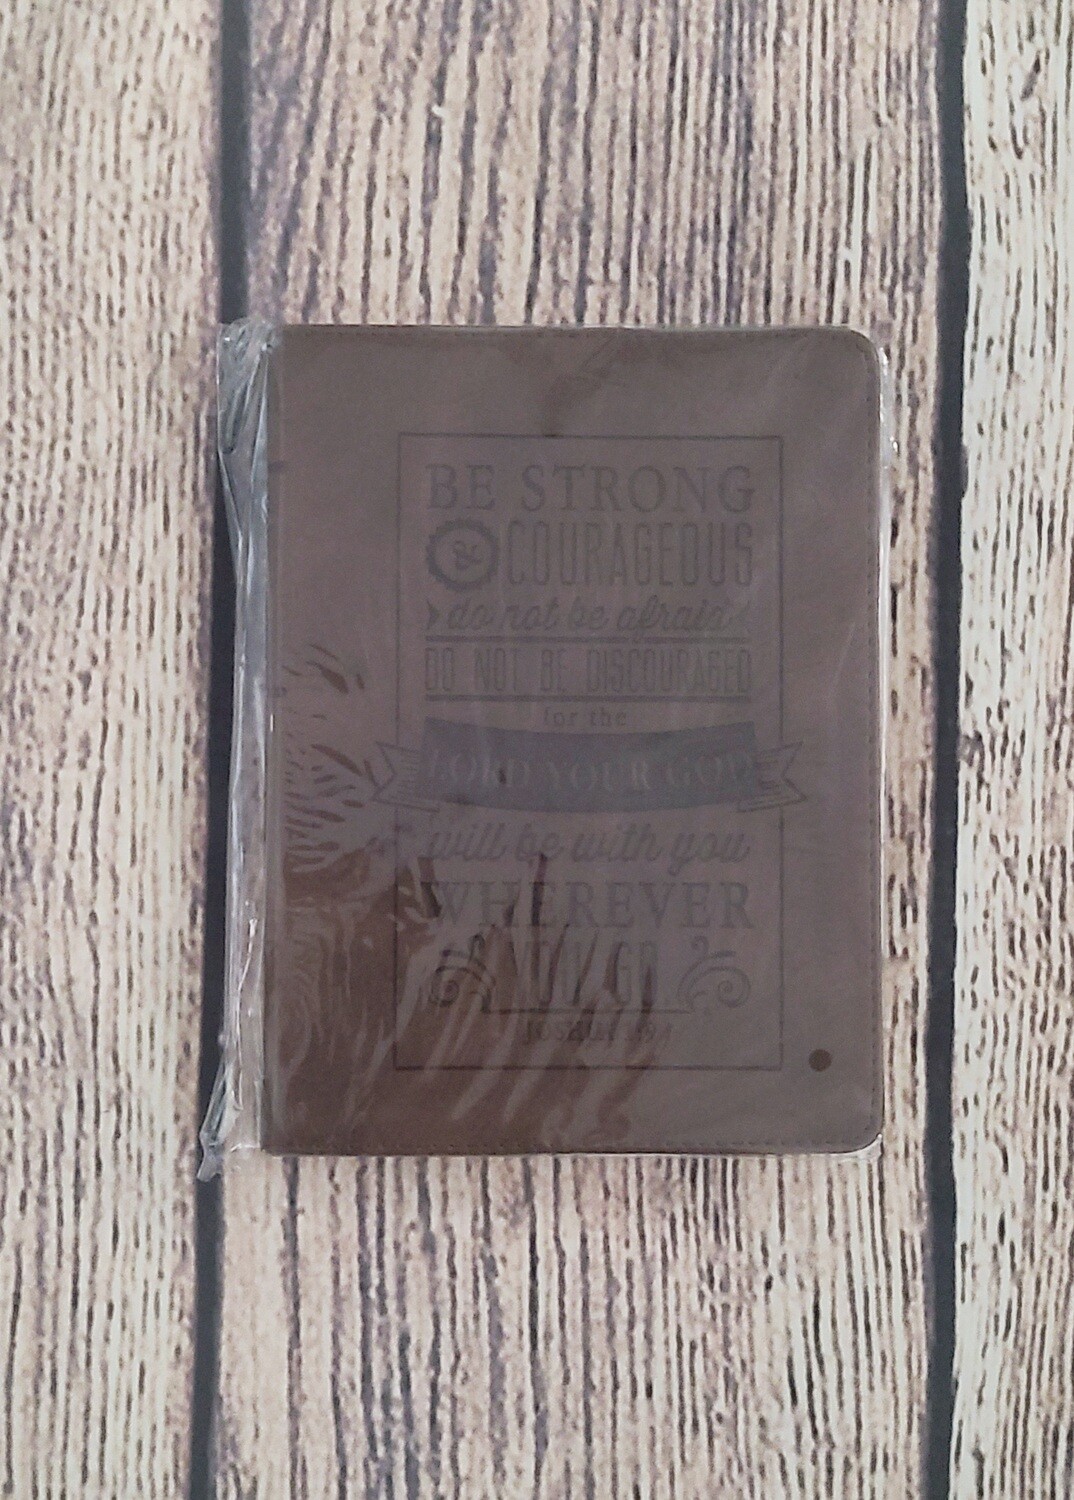 Be Strong and Courageous Brown Leather Journal